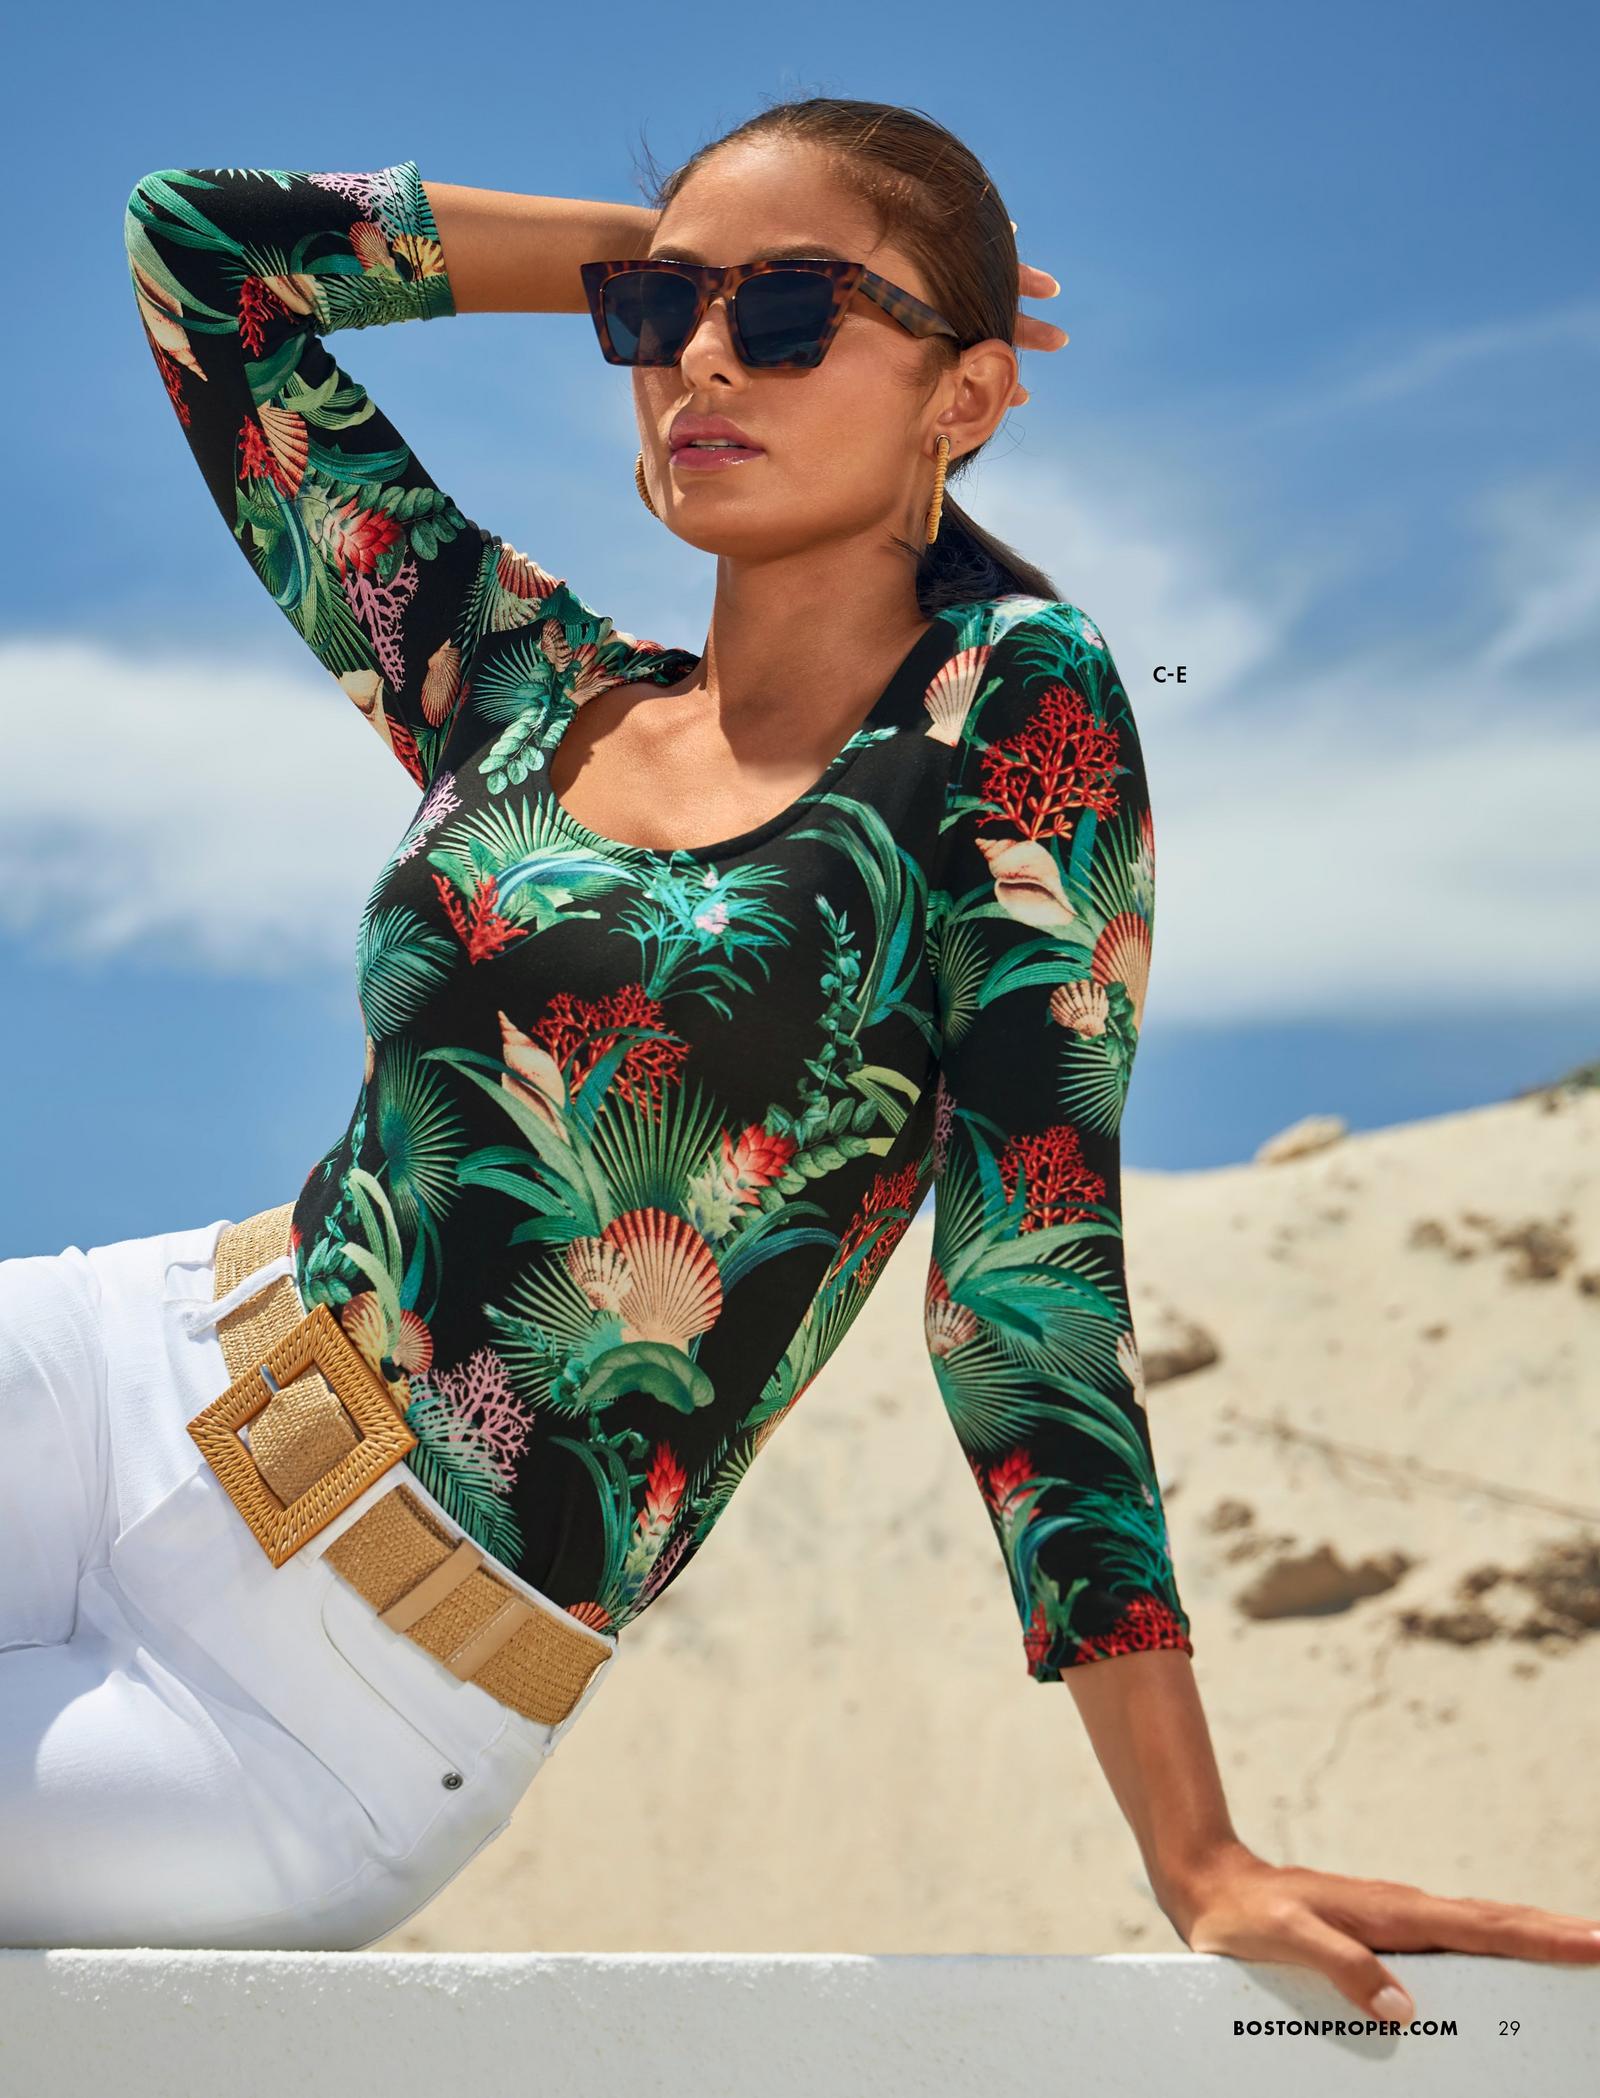 model wearing a sea life print scoop-neck three-quarter sleeve top, tan belt, white jeans, and sunglasses.